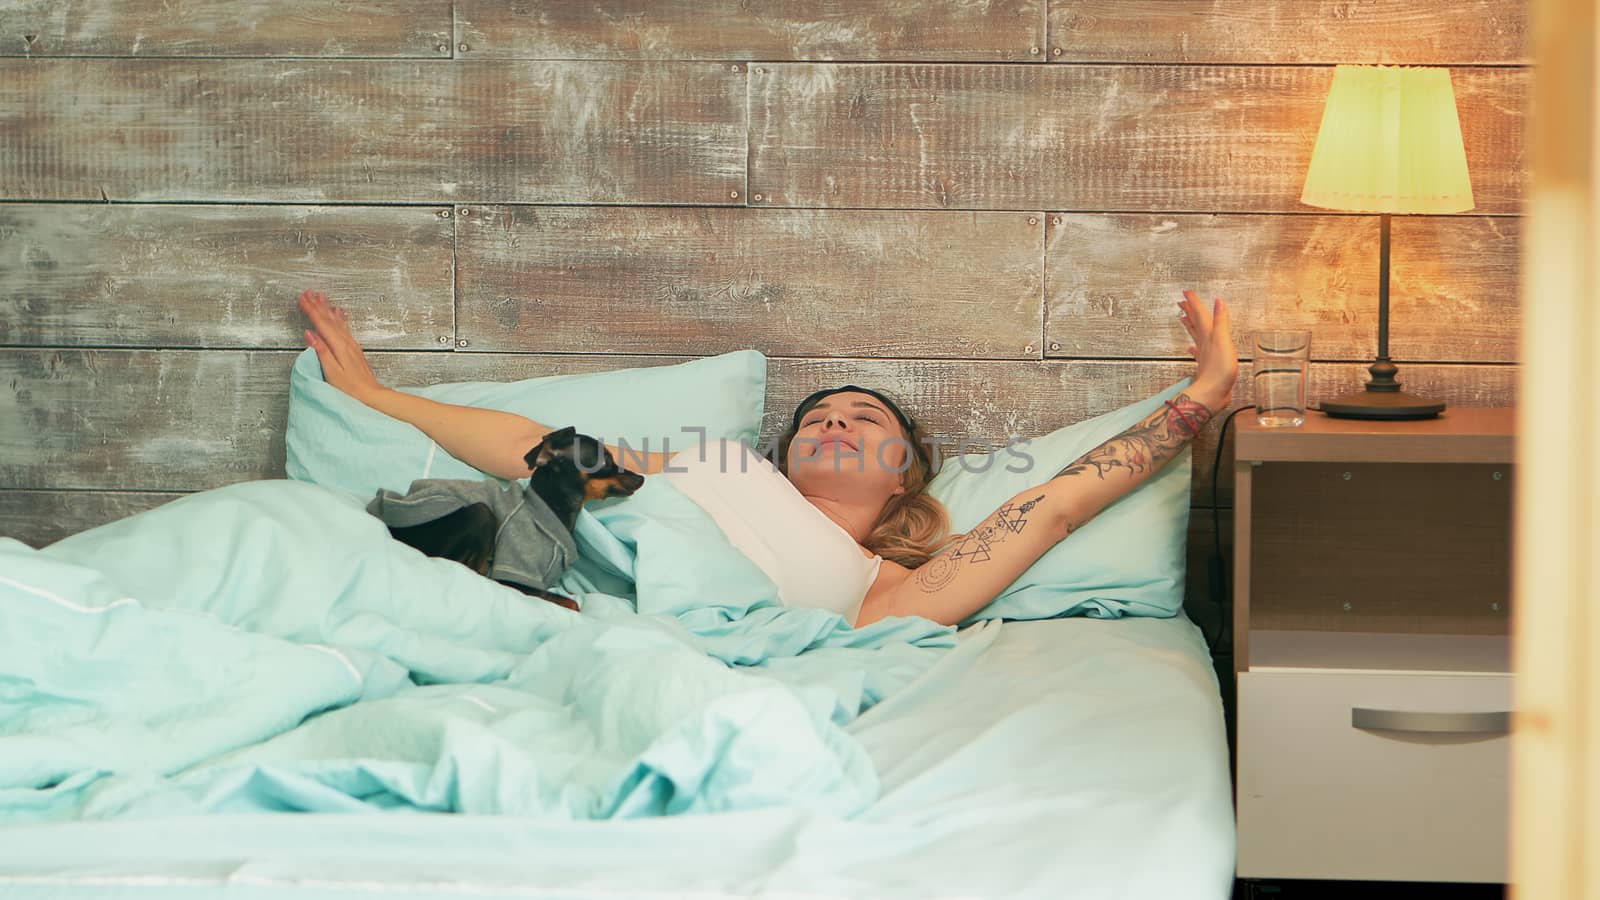 Beautiful young woman in pajamas taking off her sleep mask while waking up. Happy dog.